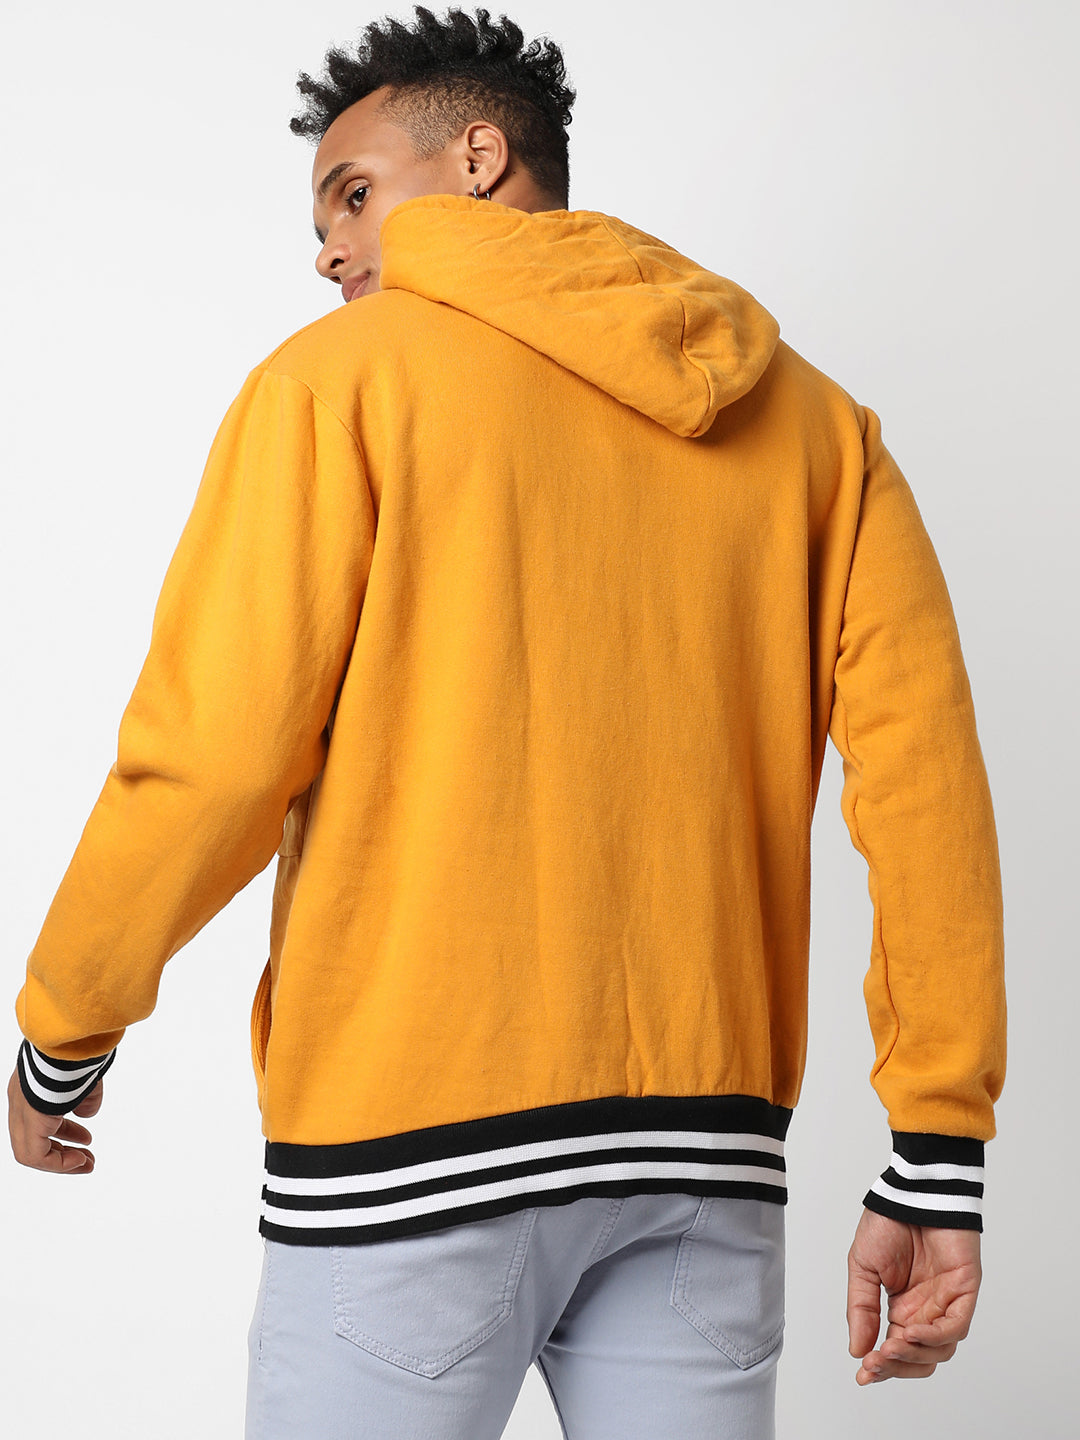 Cotton Mustard Yellow Full Sleeve Sweatshirt With Hoodie Regular Relaxed Fit